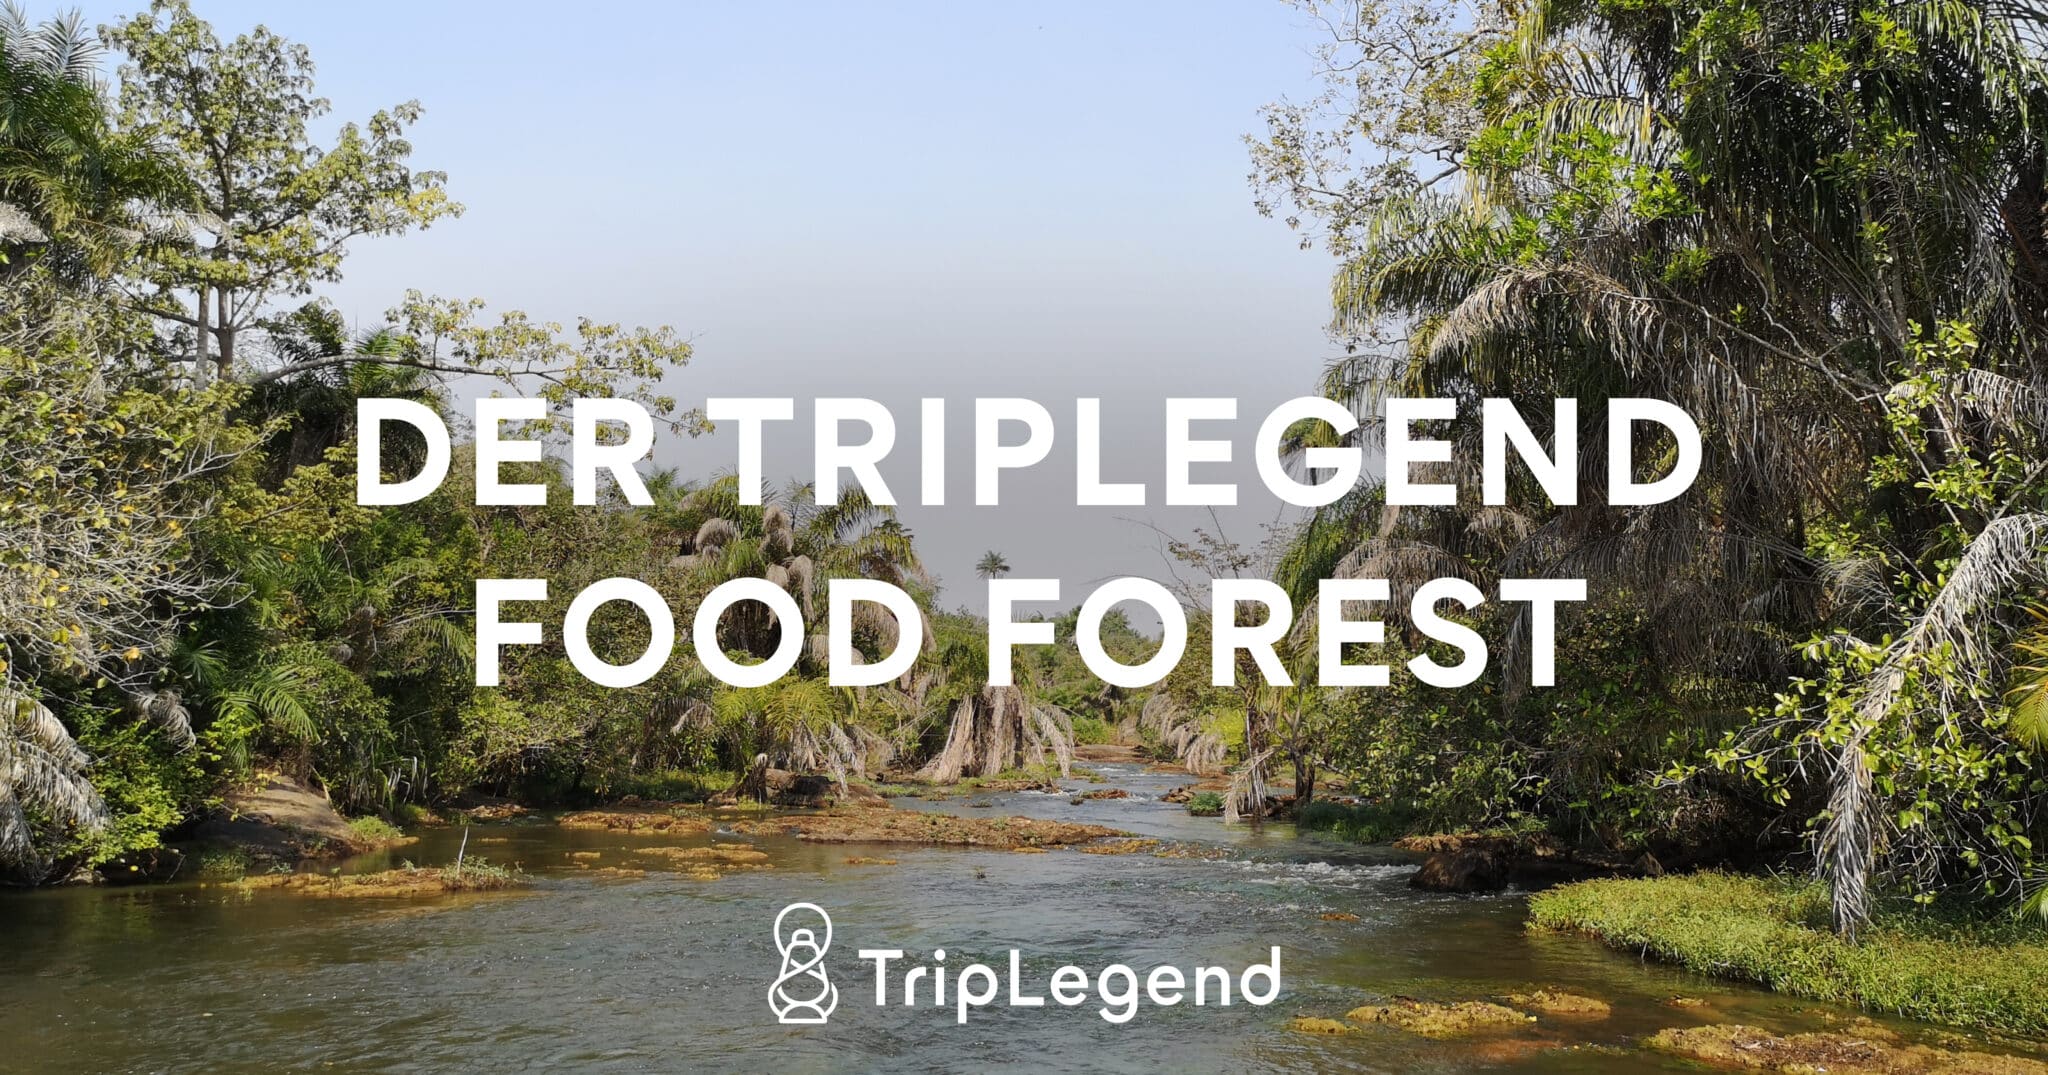 The TripLegend Food Forest - Food Forest